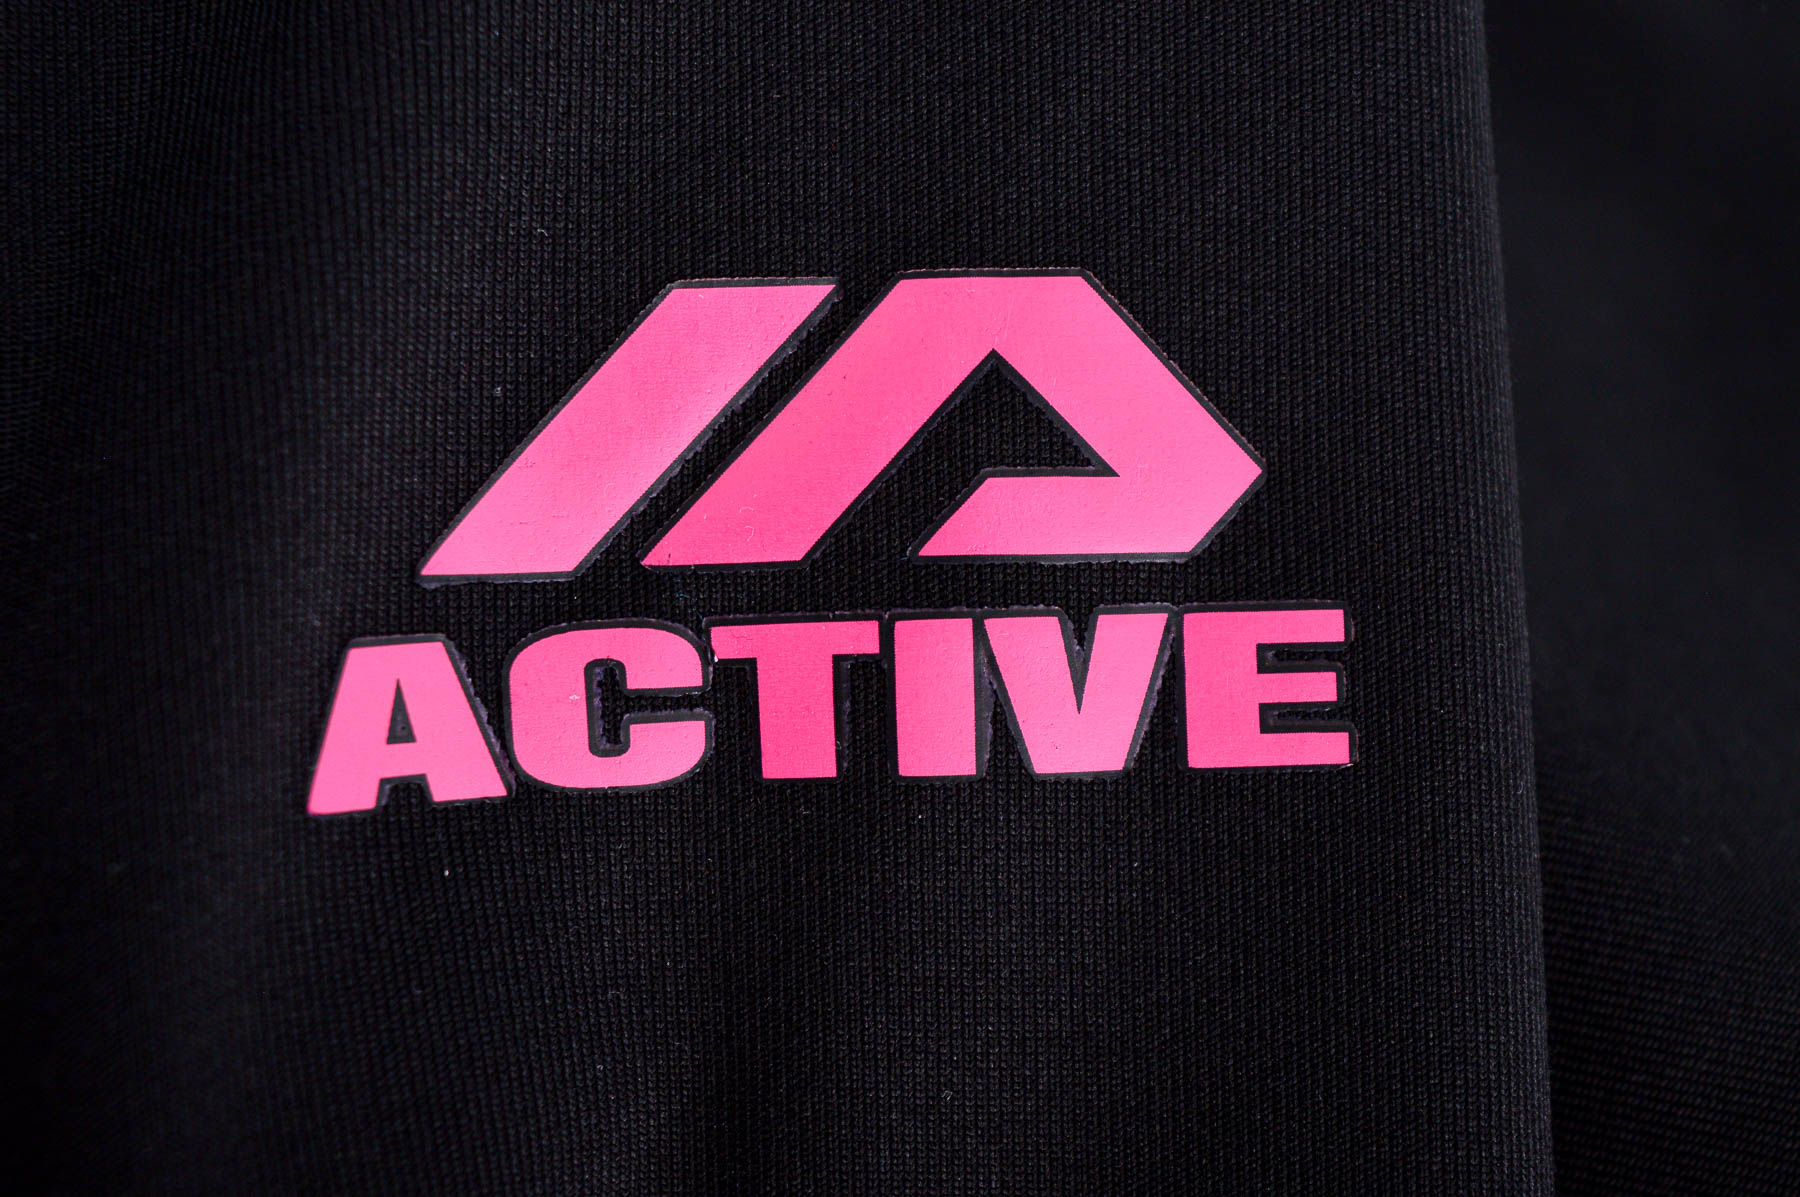 Female sports top - Active - 2